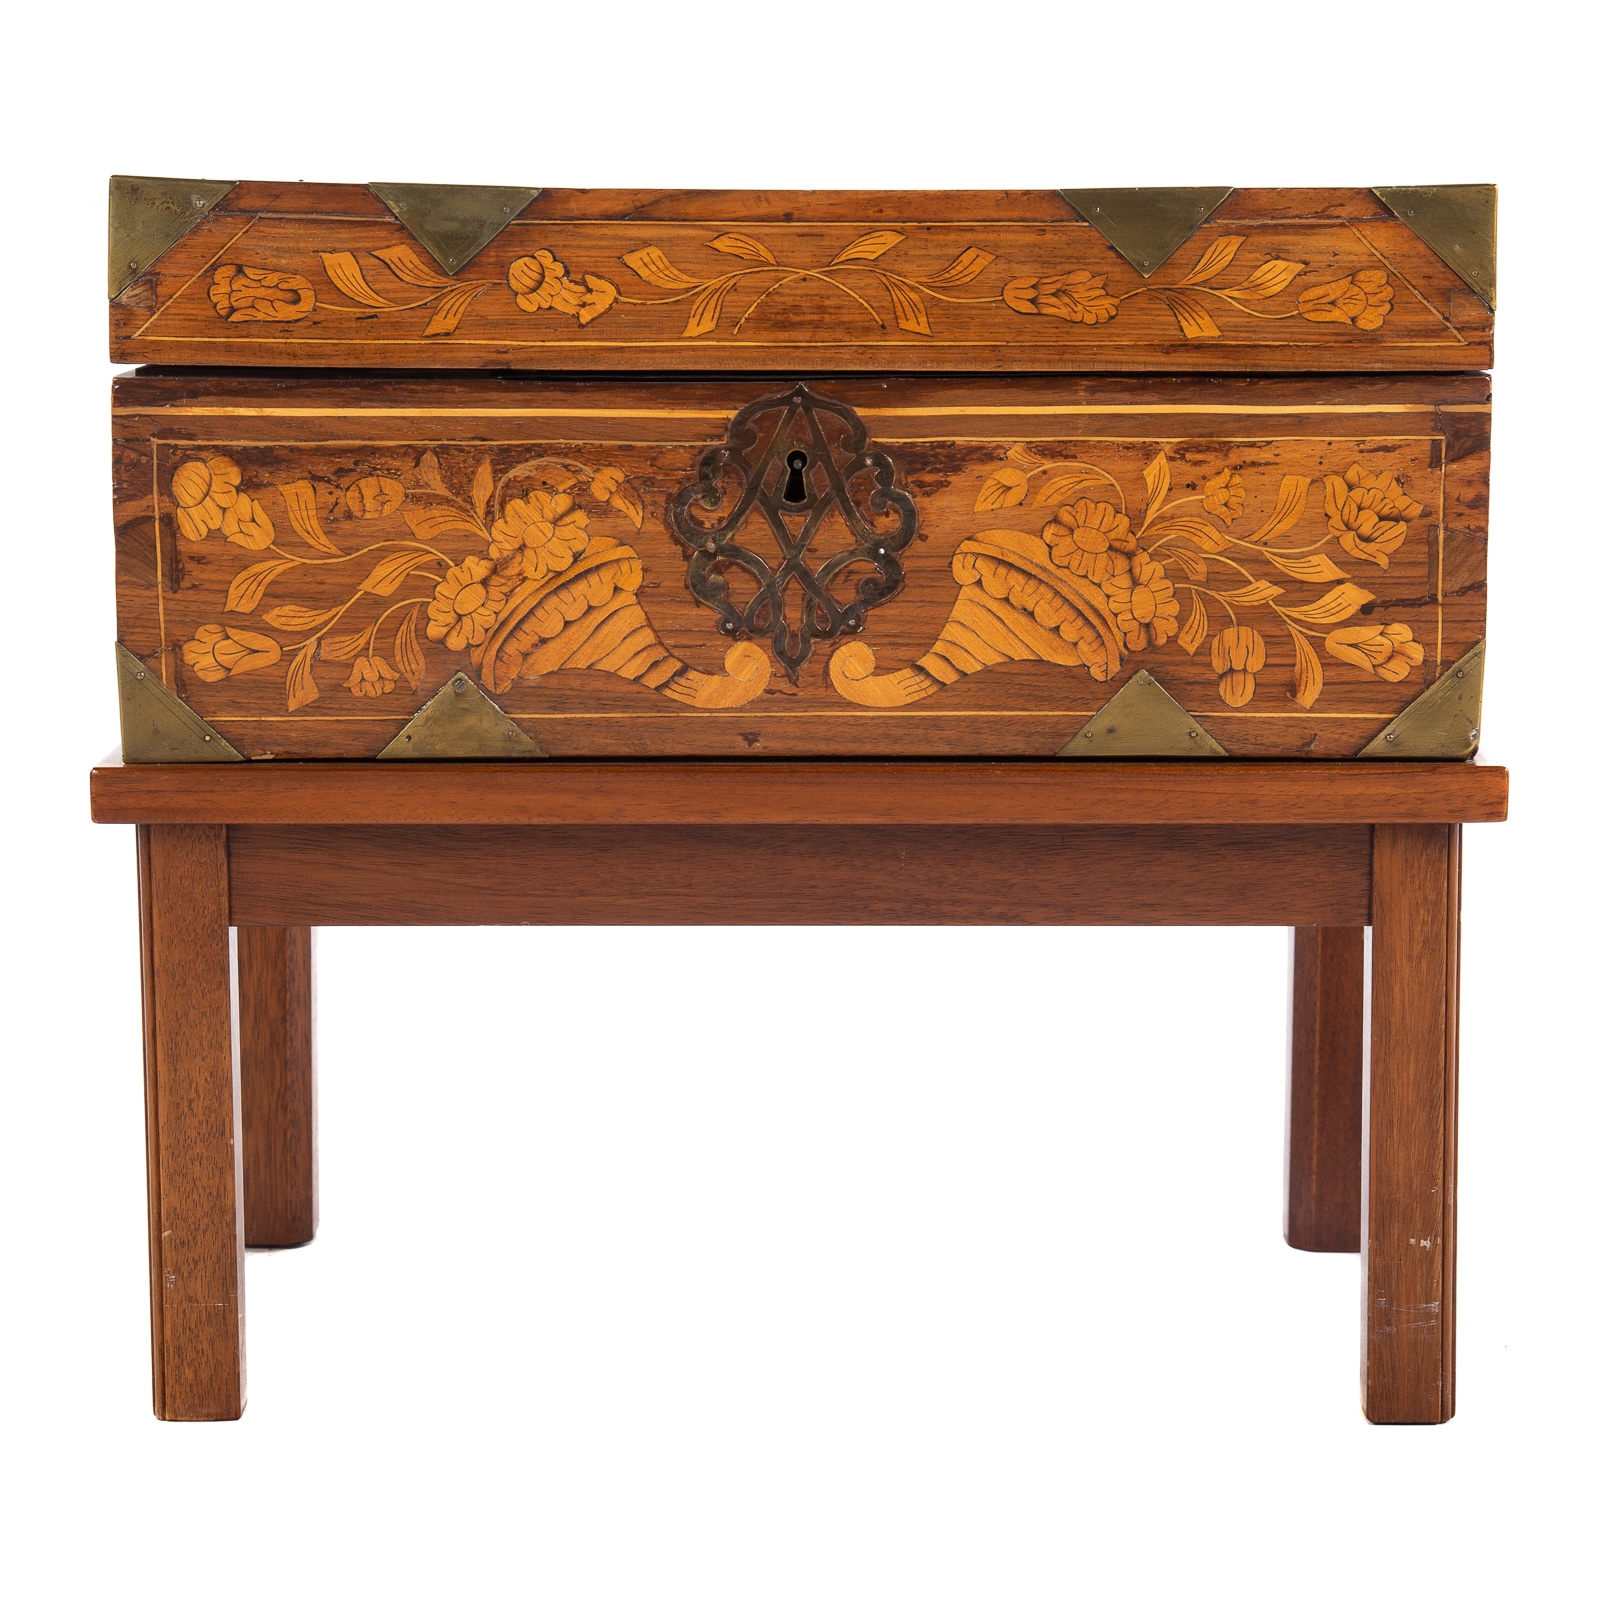 CONTINENTAL PROBABLY DUTCH MARQUETRY 29daea